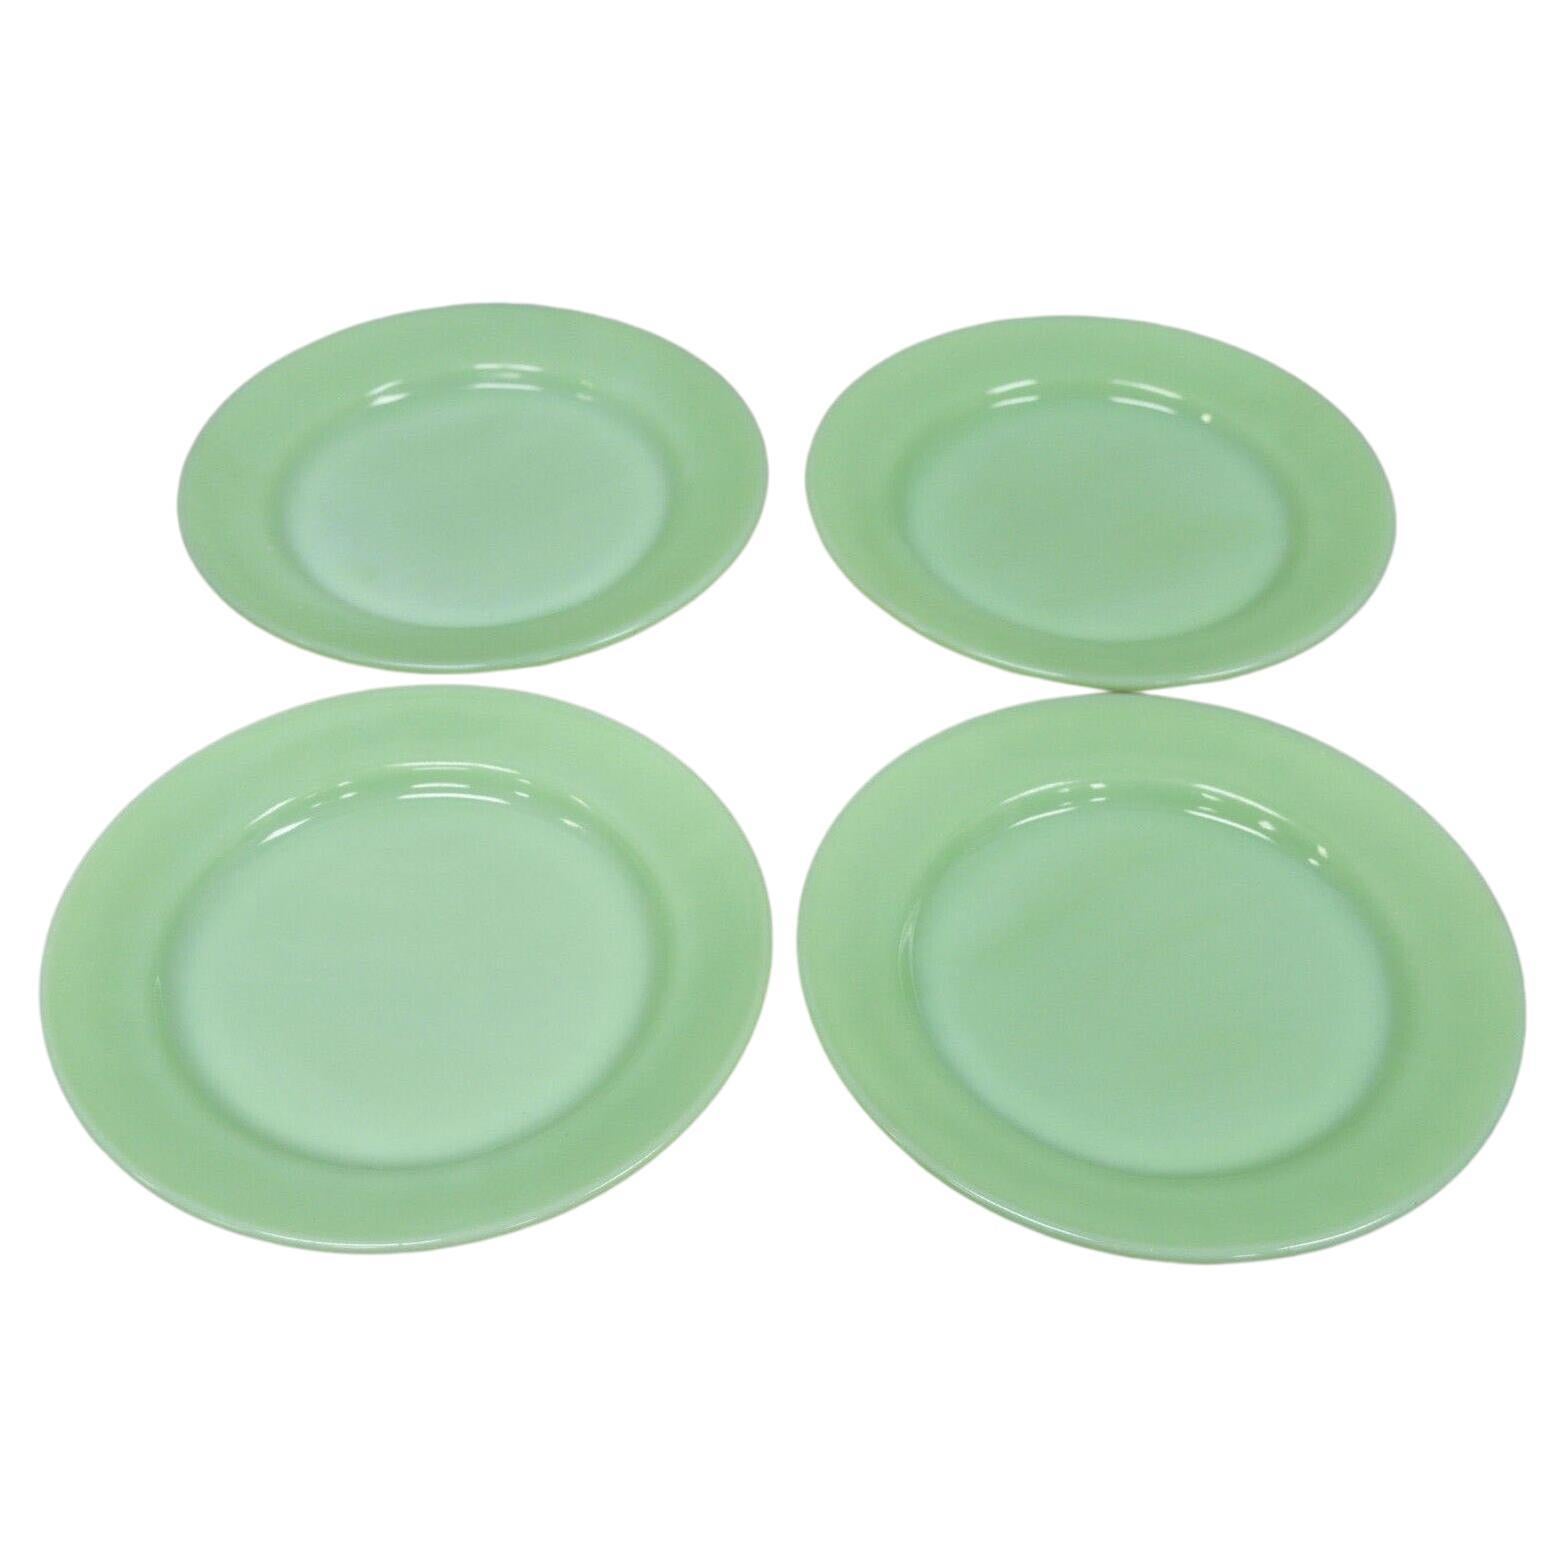 Vintage Fire King Jadeite Green Oven Ware Lunch Dinner Plate, 4 Pc Set